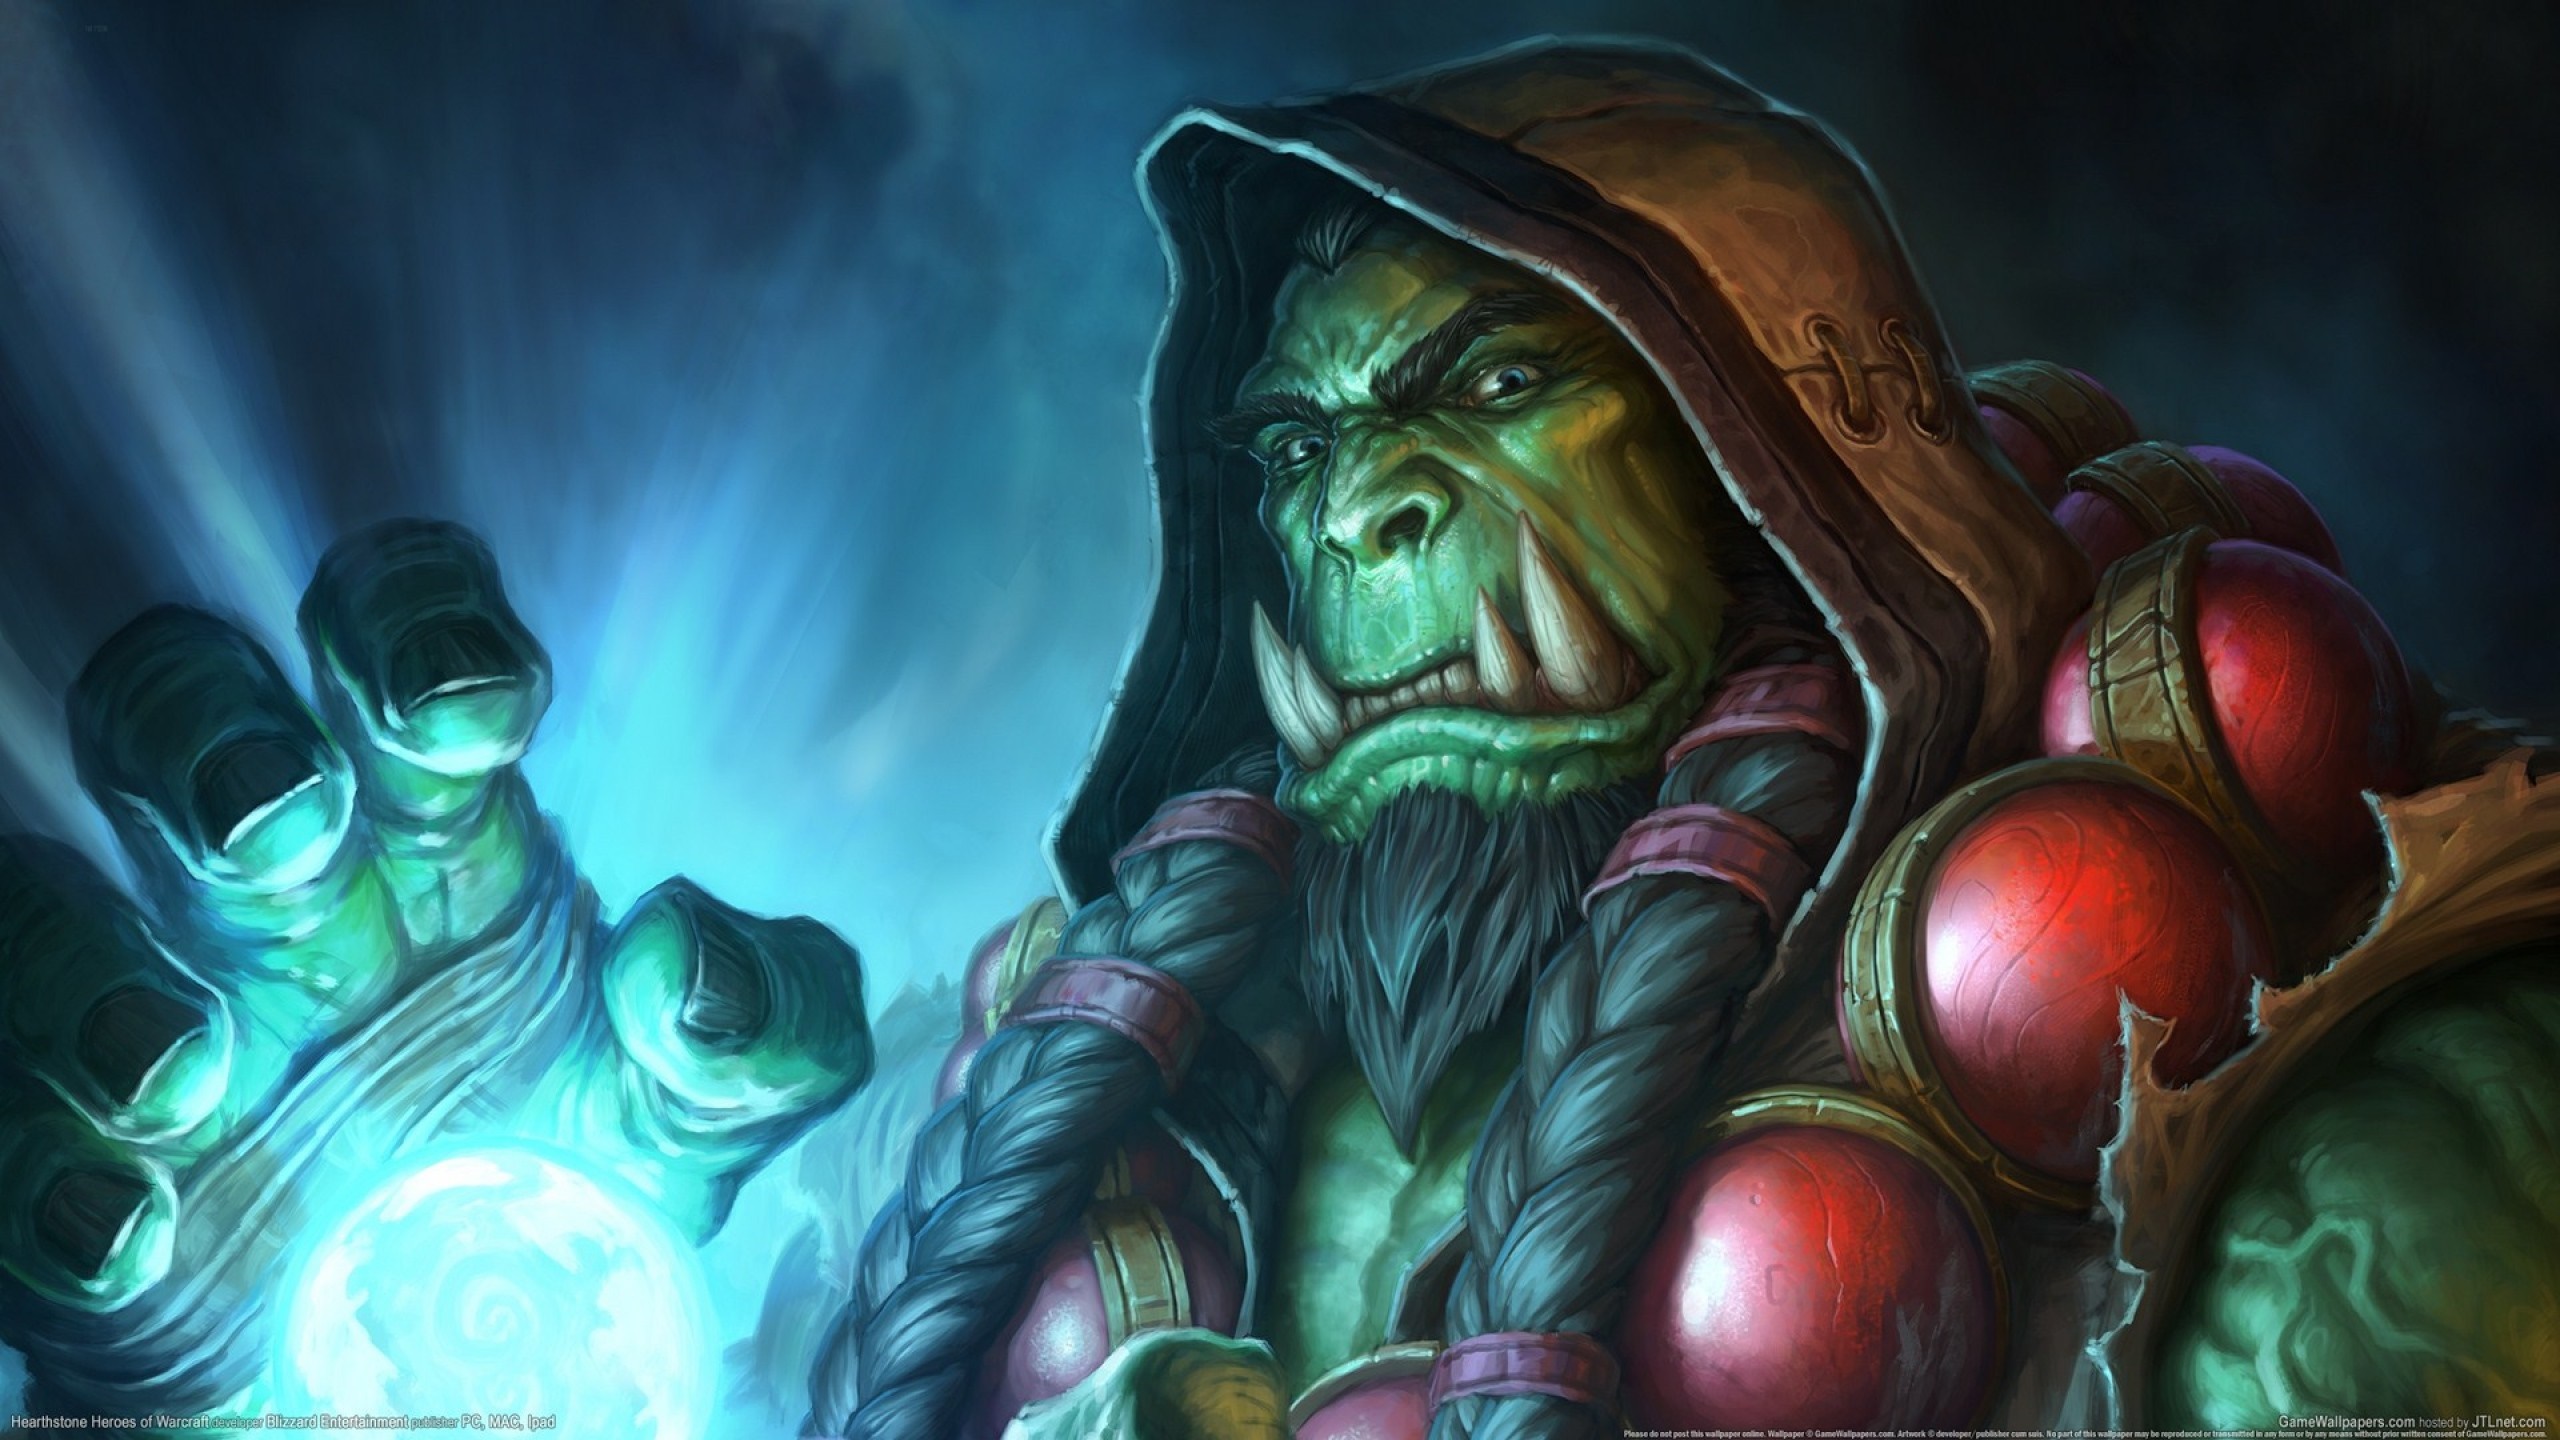 Illustration blizzard entertainment ics hearthstone heroes of warcraft warcraft thrall games screenshot puter wallpaper special effects pc game